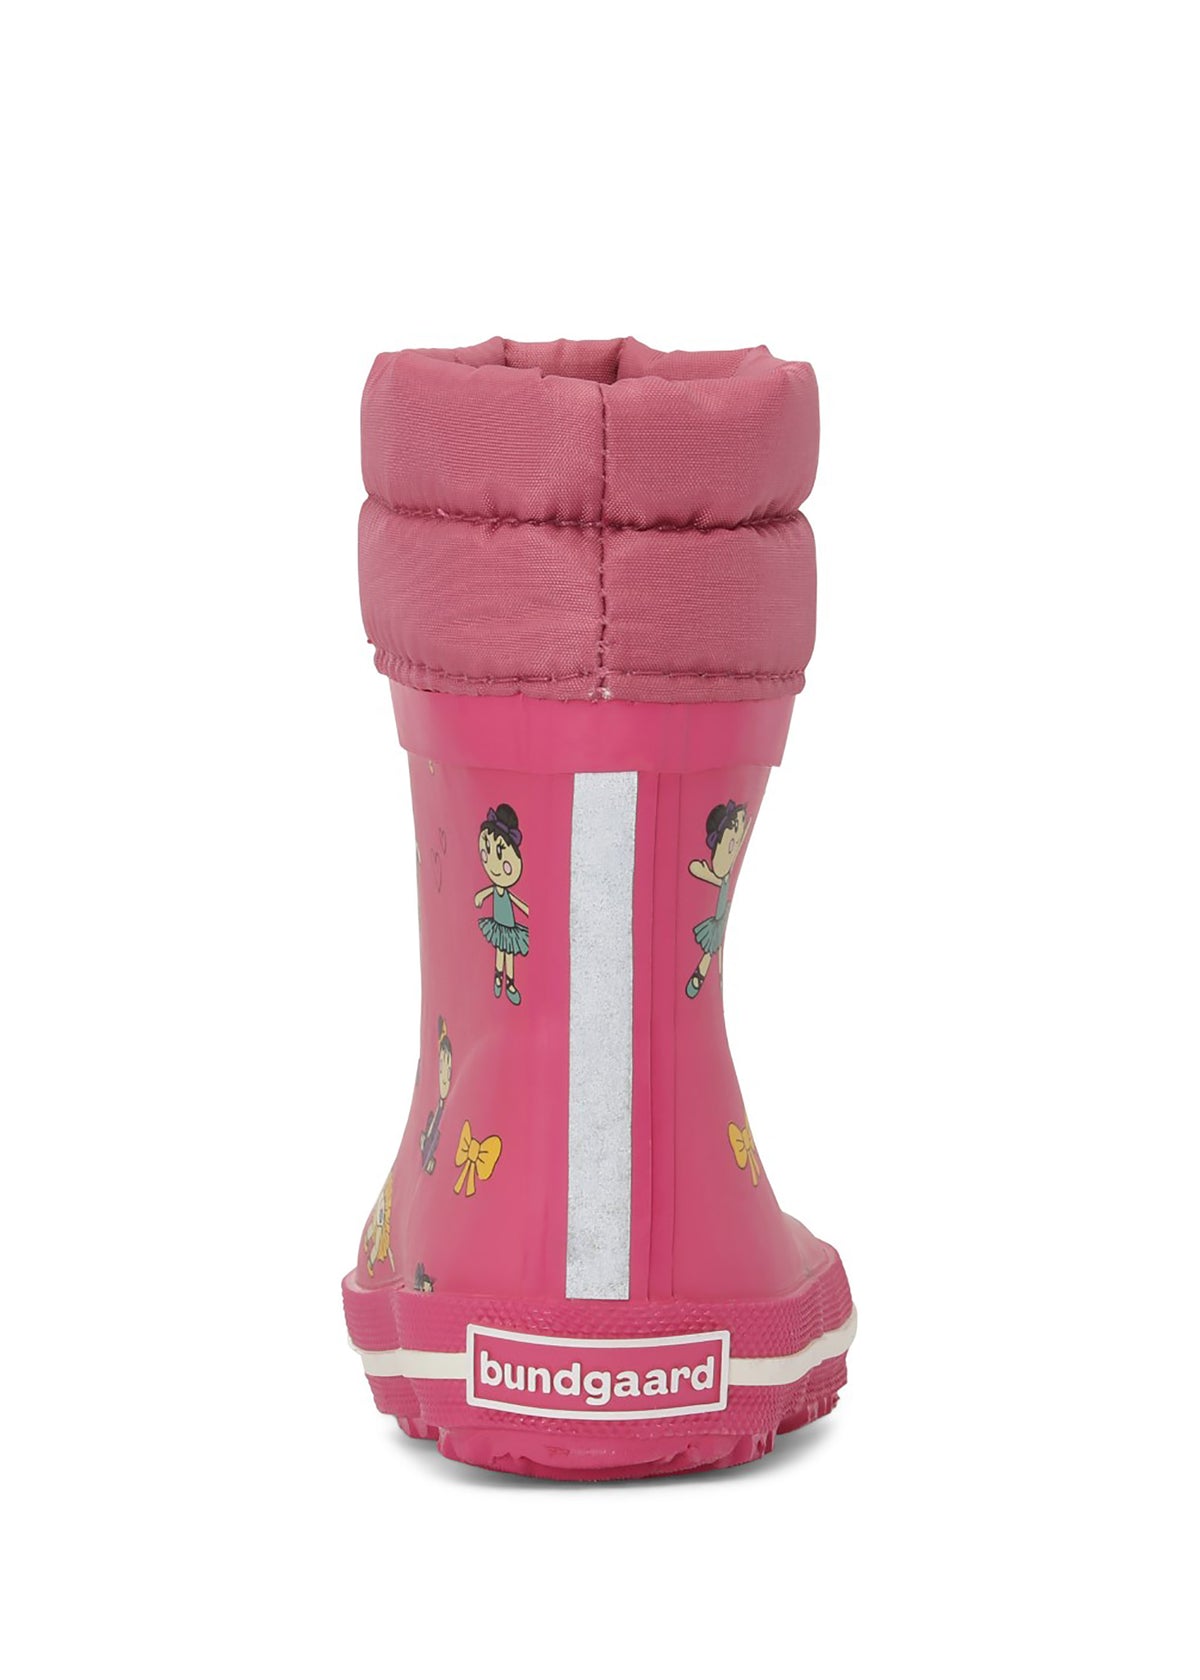 Rubber boots with a warm lining - pink, ballerina, short shaft, drawstrings, Cirro Low Warm